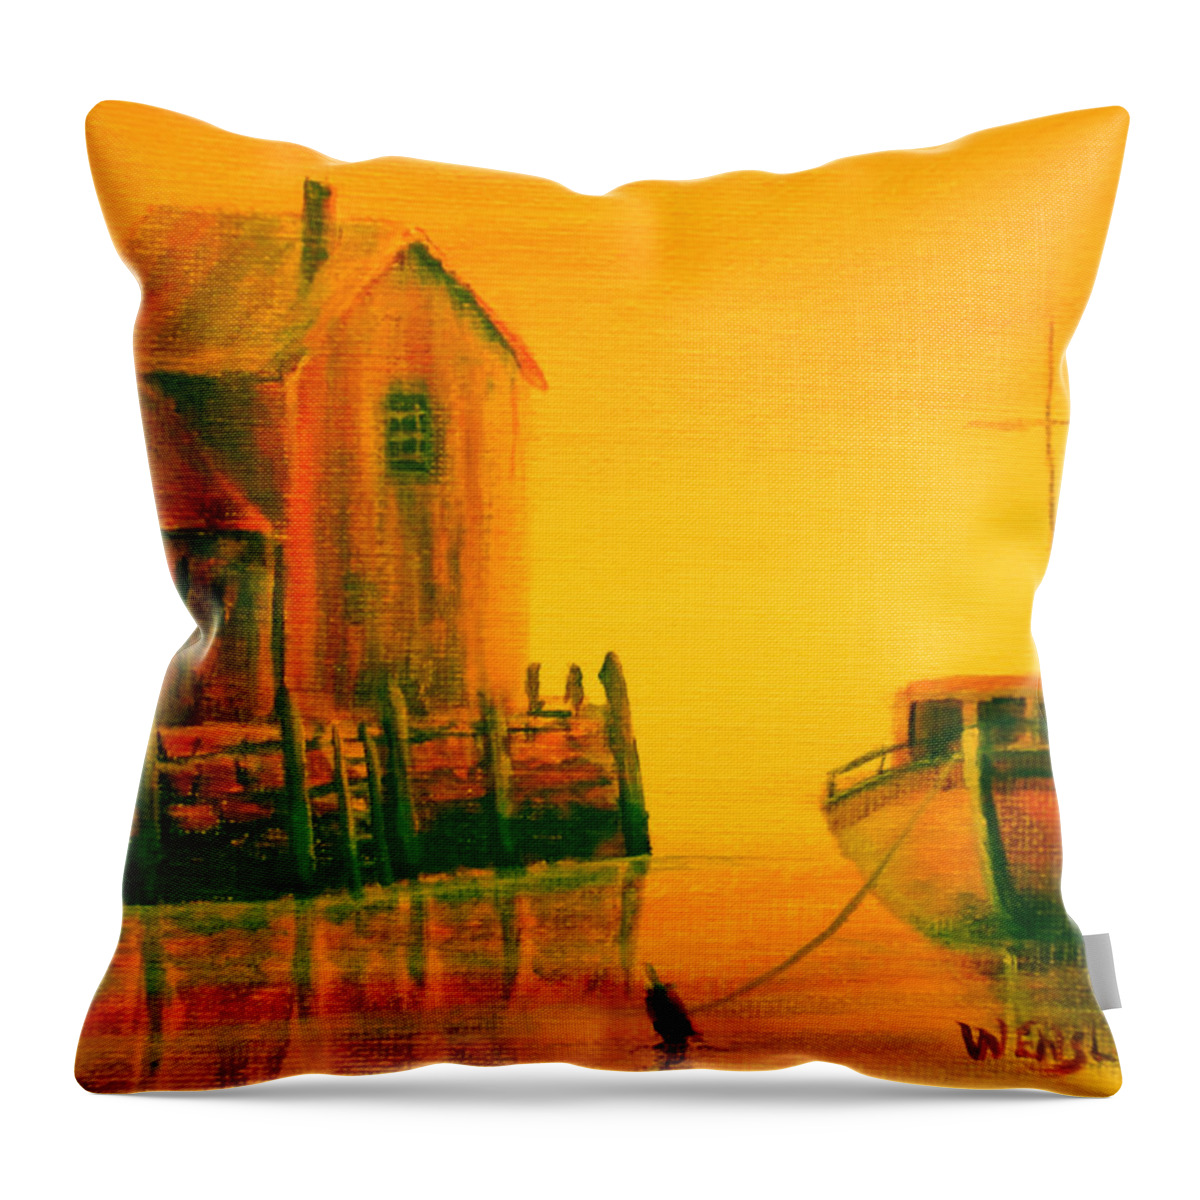 Seascape Throw Pillow featuring the painting Rockport 2 by Wayne Enslow